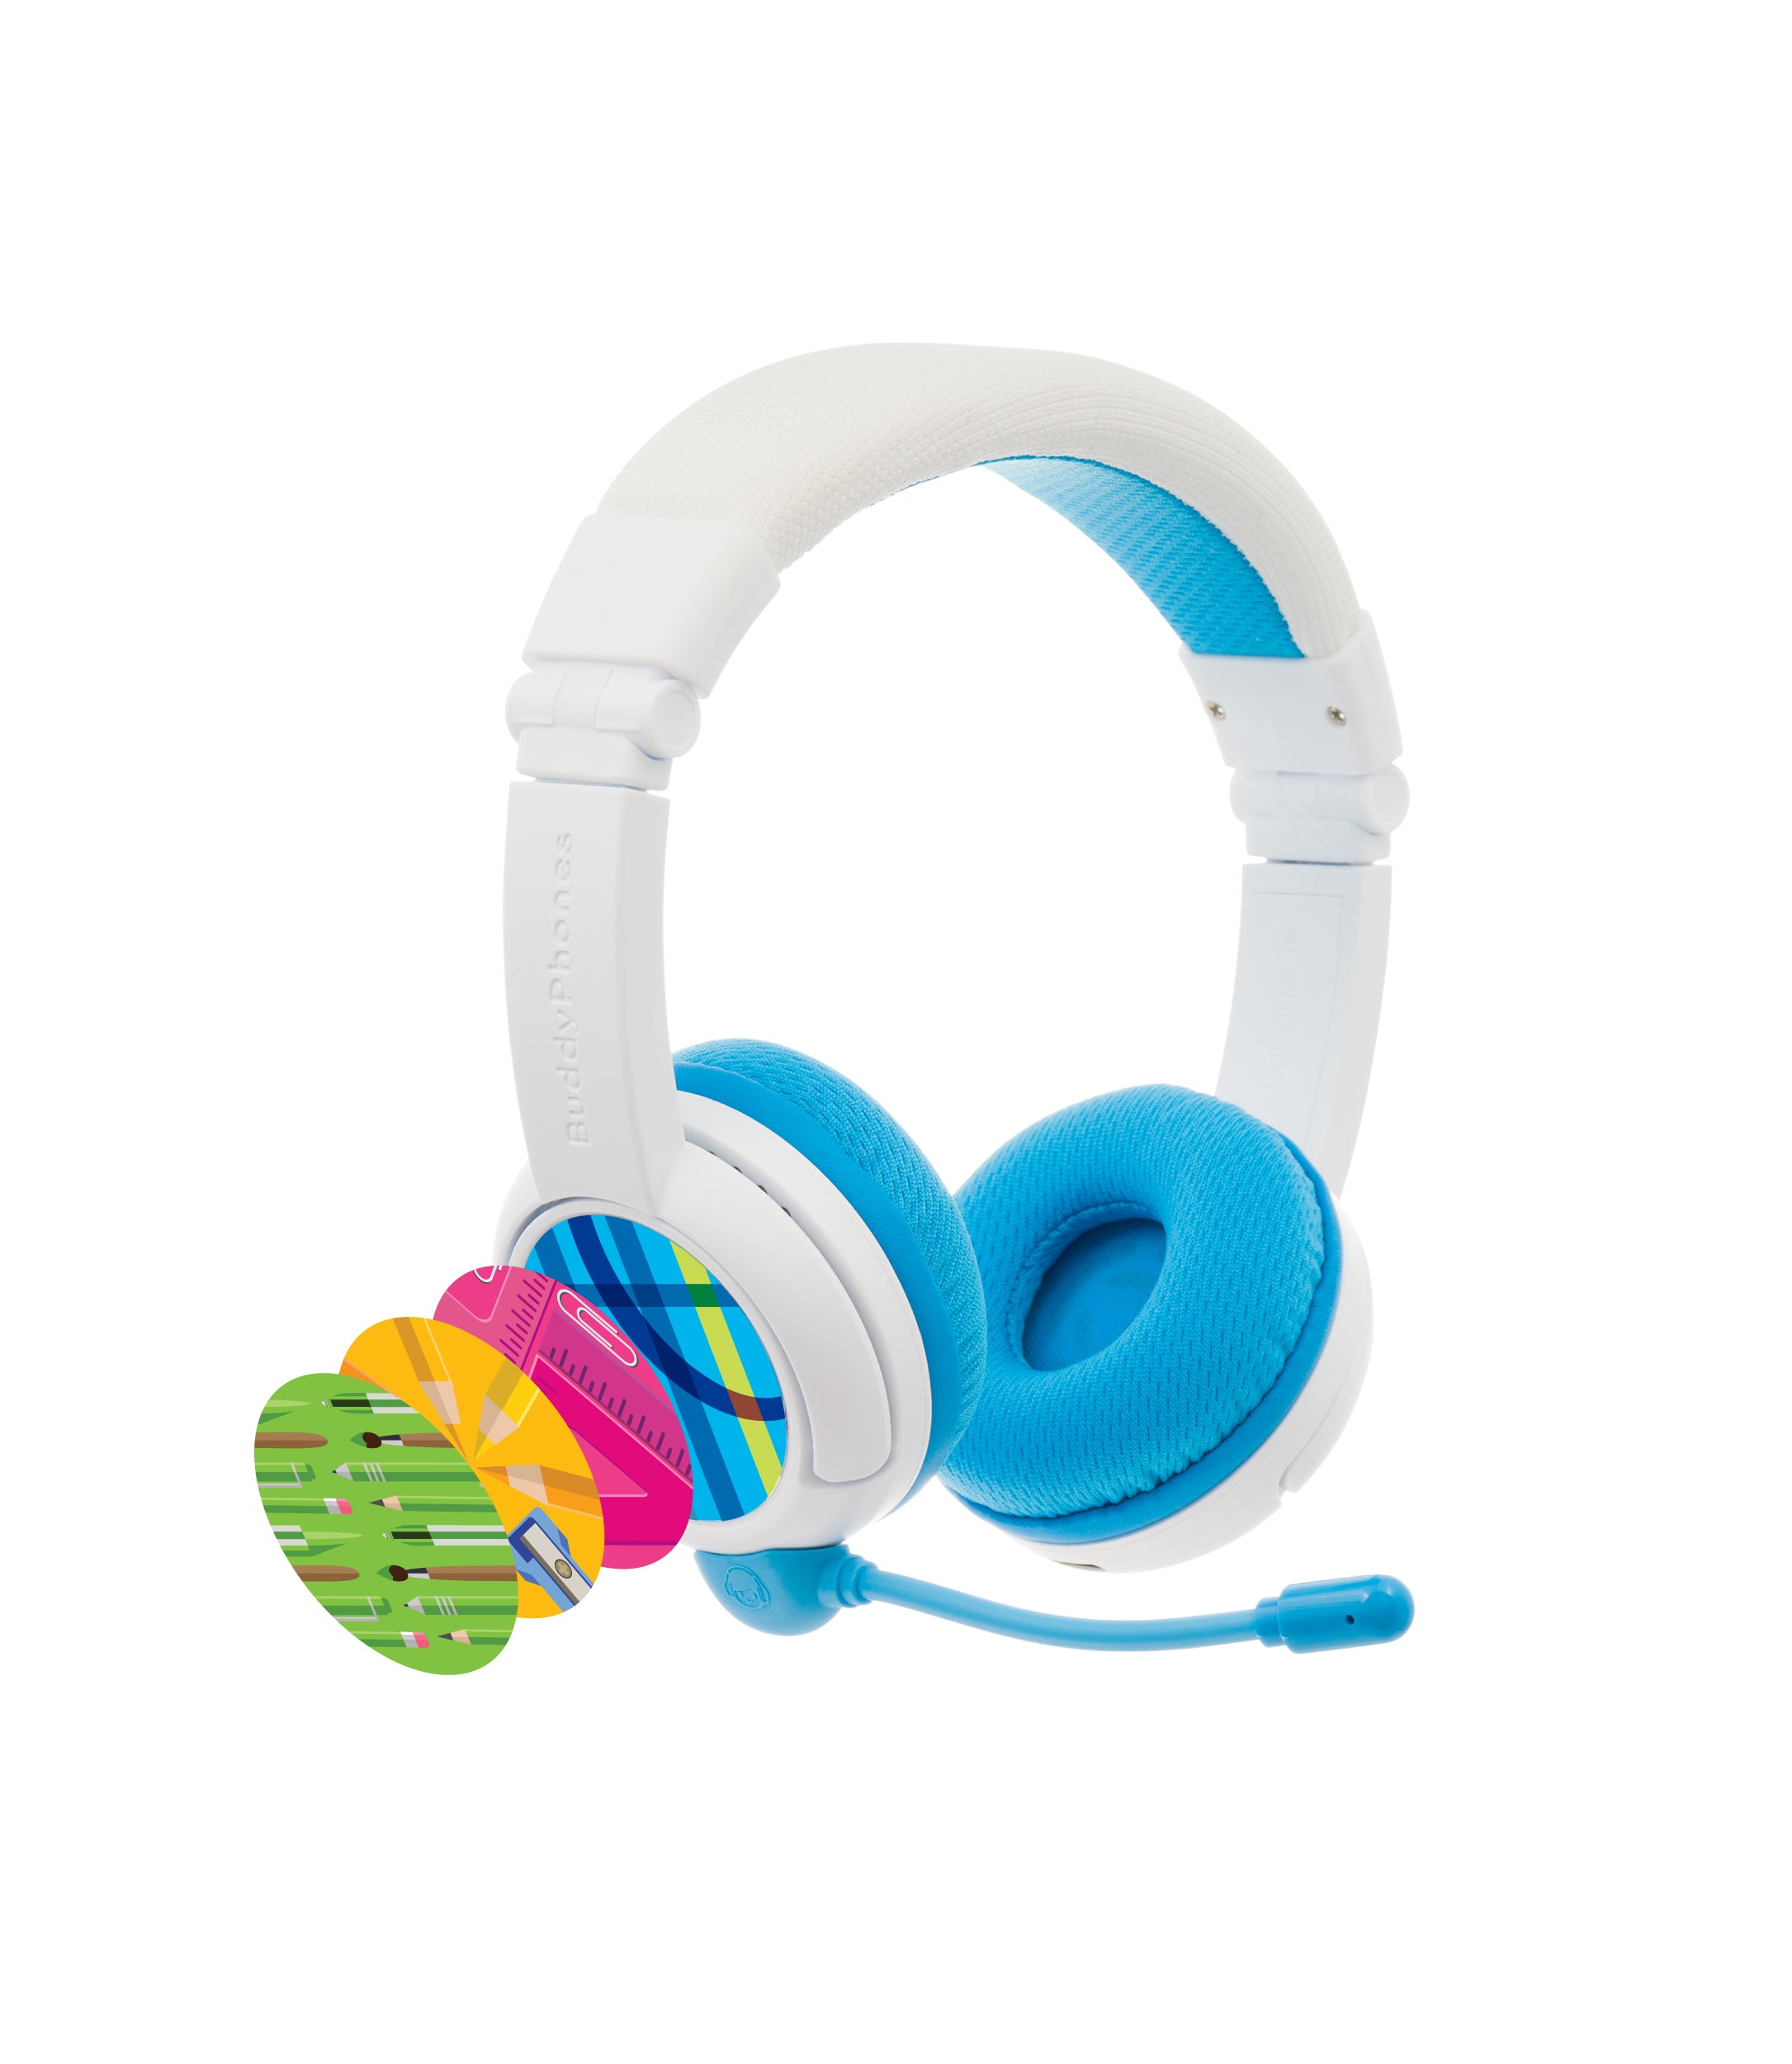 The Recommended Volume-safe Gaming Headphones for Kids – onanoff